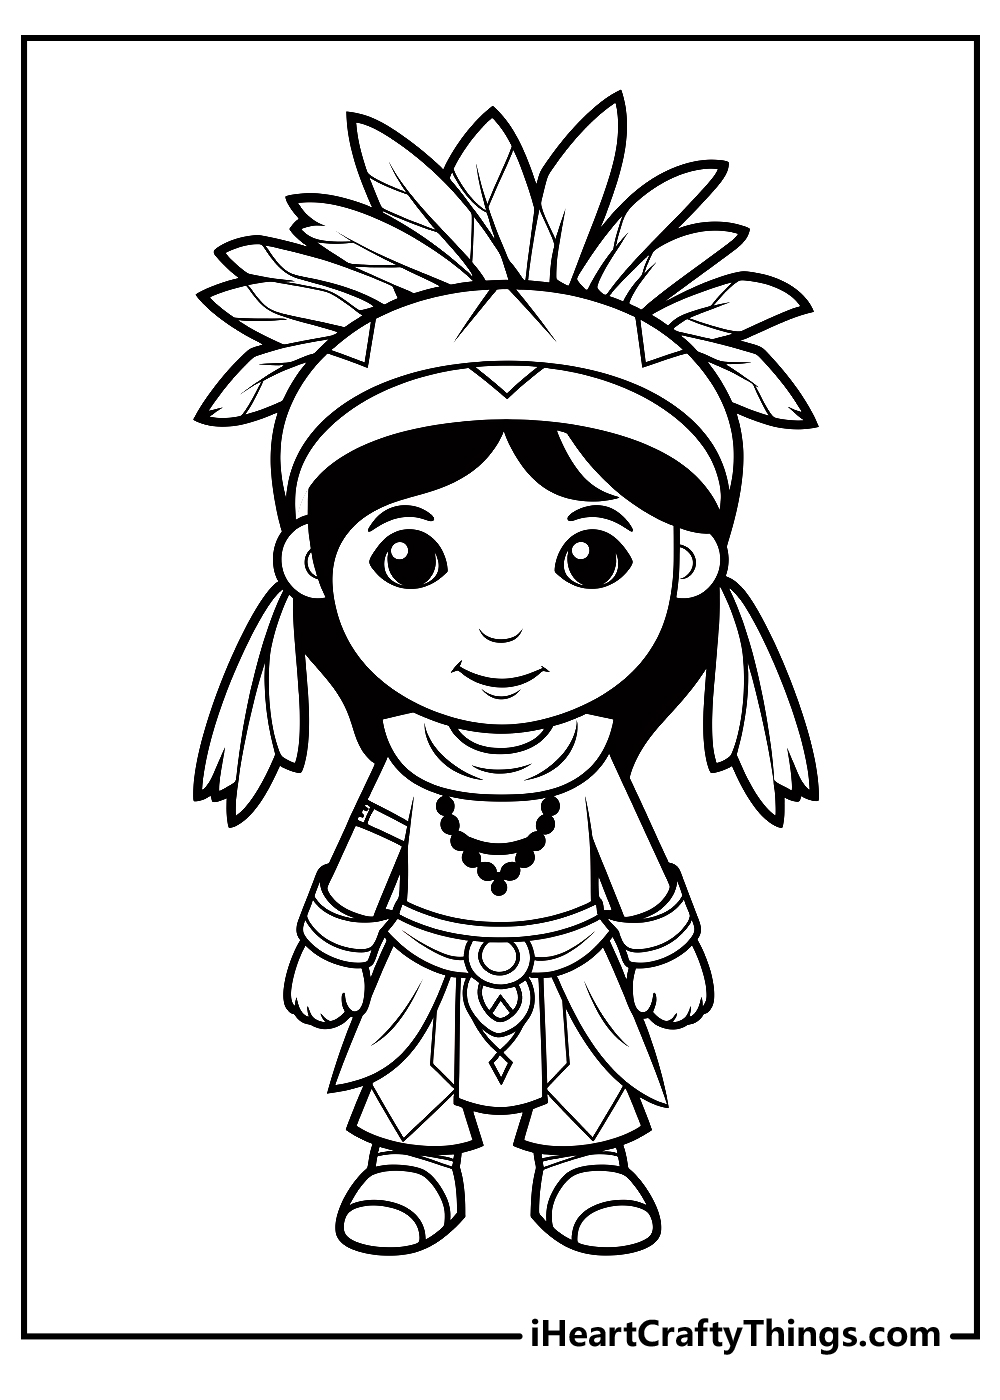 Native american coloring pages free printables